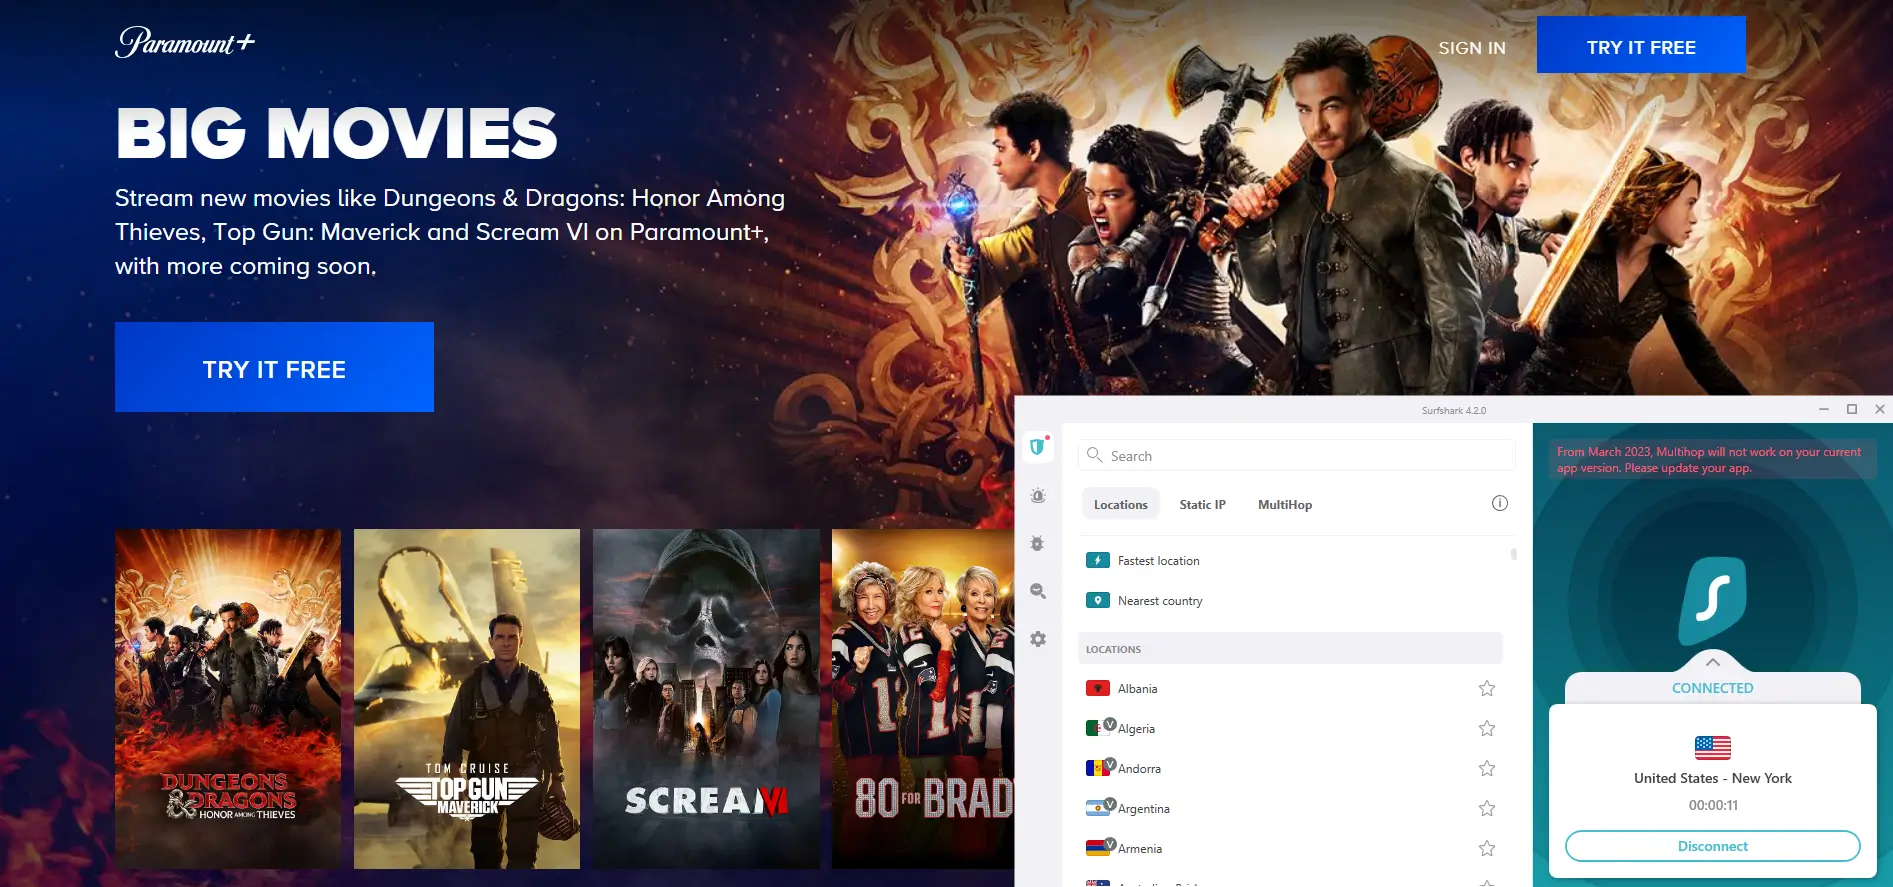 The Watchers streaming: where to watch movie online?